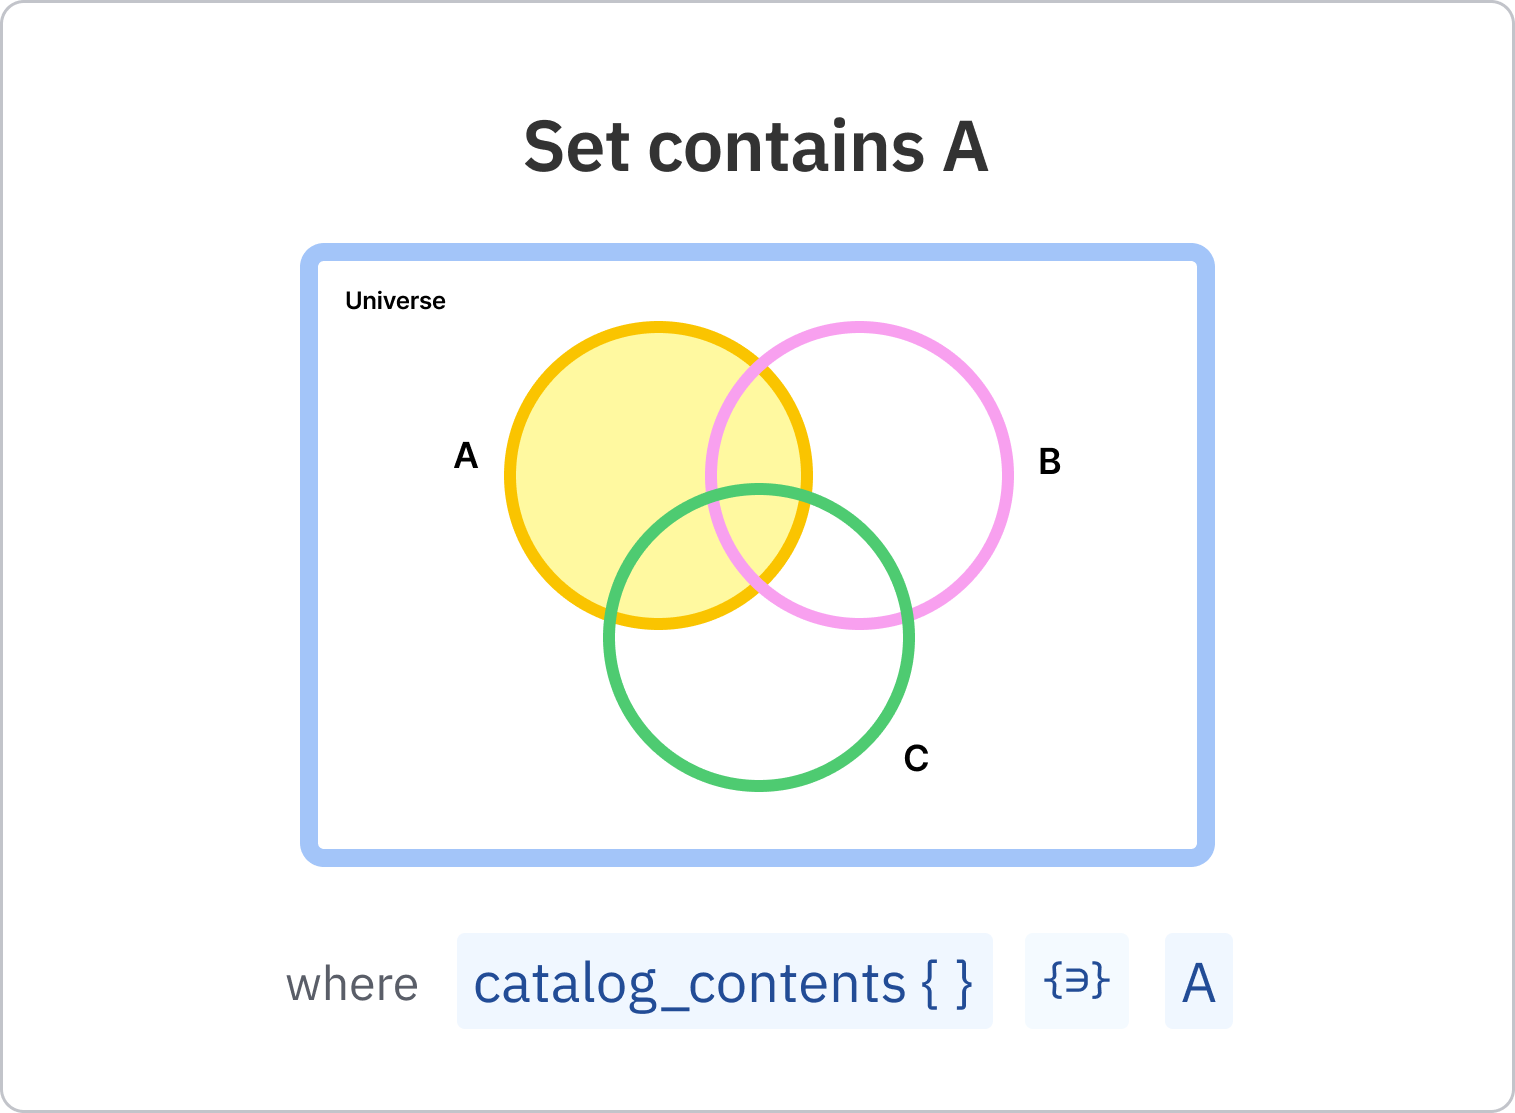 09_-_Set_contains_A.png